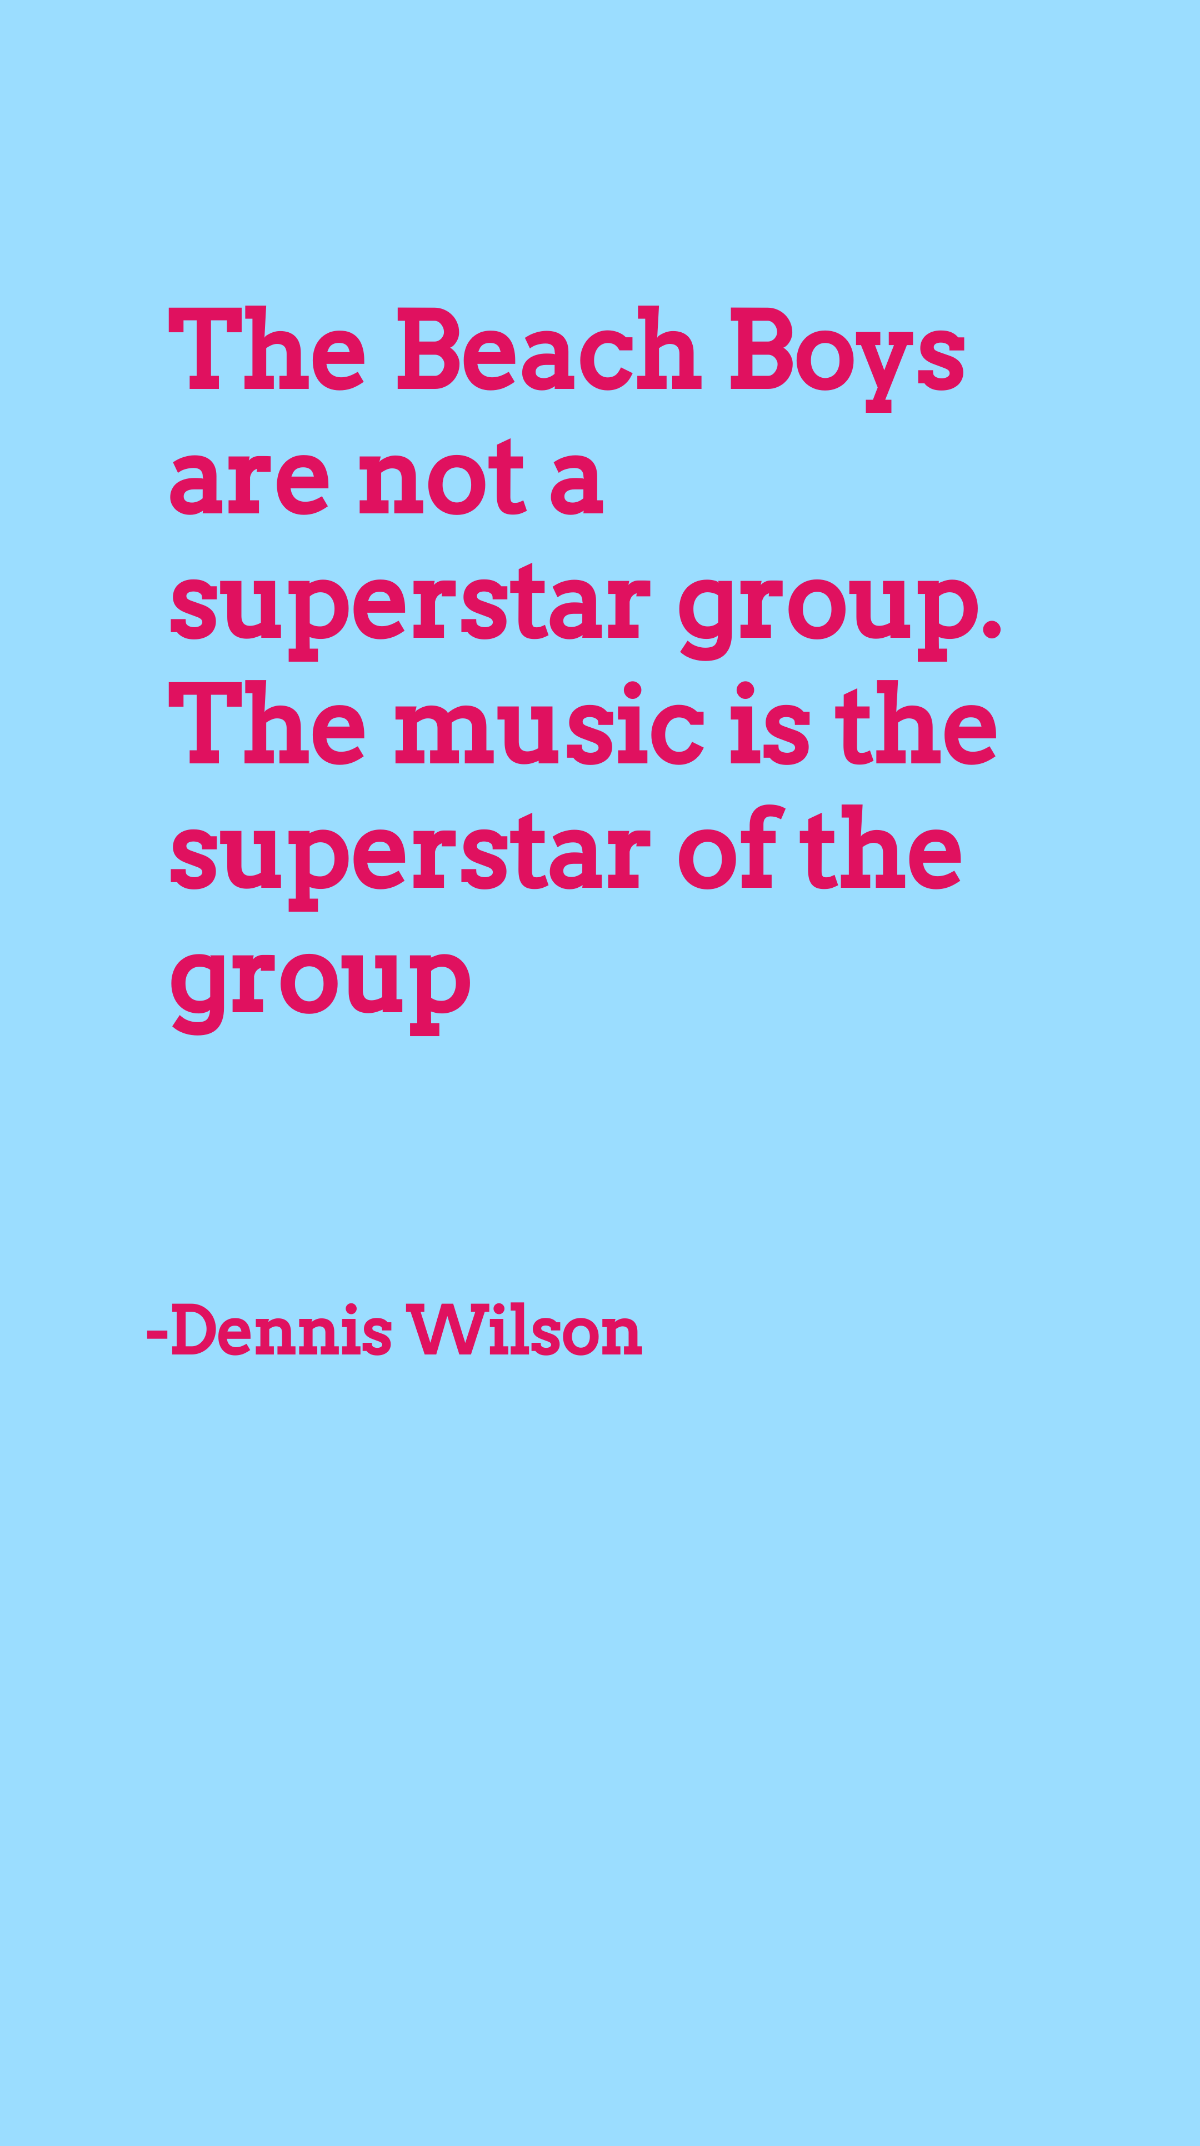 Dennis Wilson - The Beach Boys are not a superstar group. The music is the superstar of the group Template